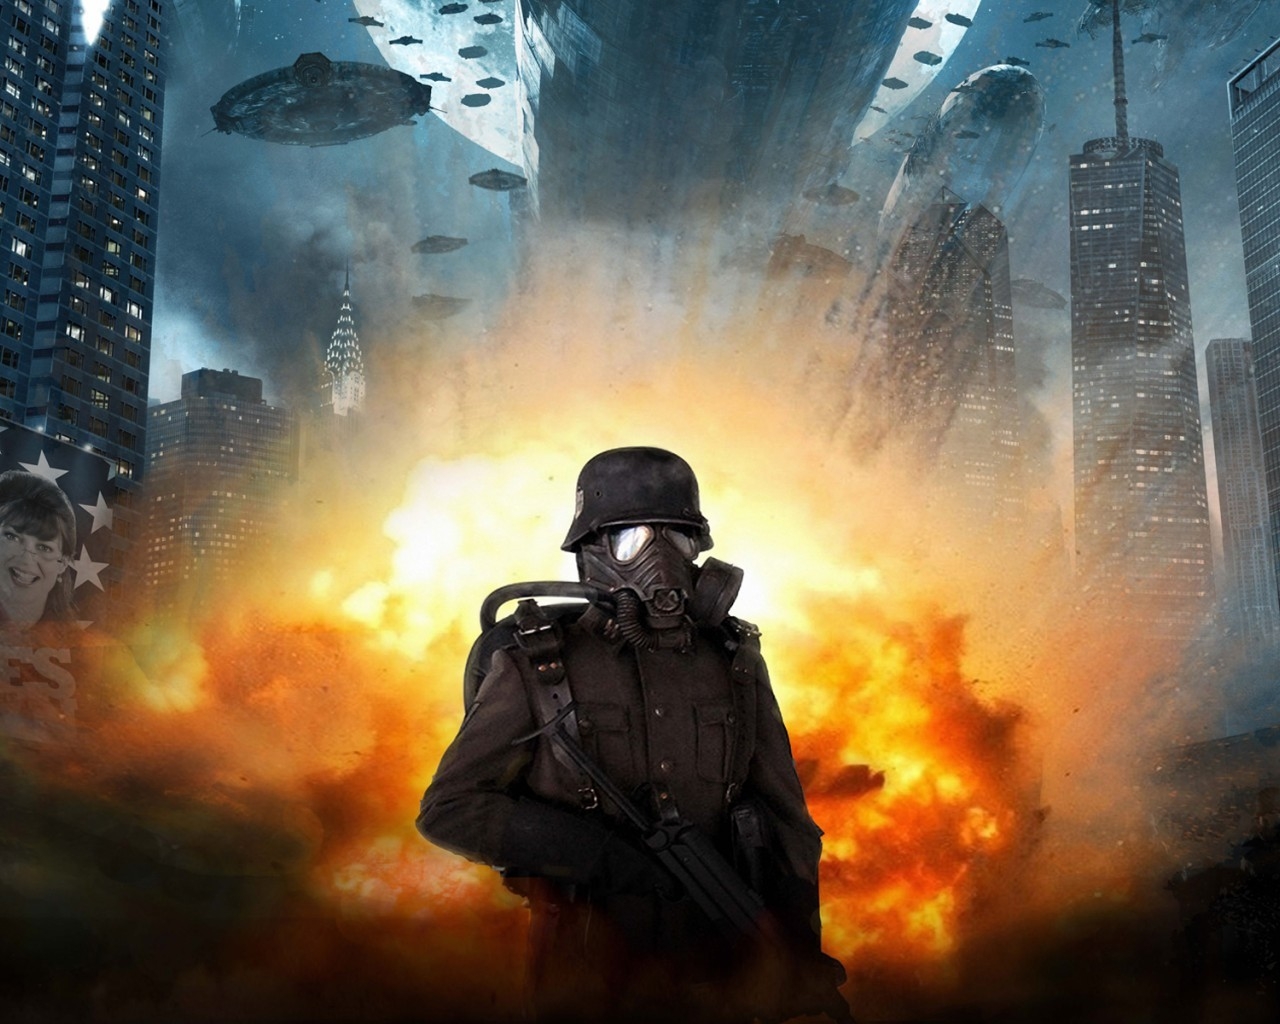 Iron Sky Soldier for 1280 x 1024 resolution